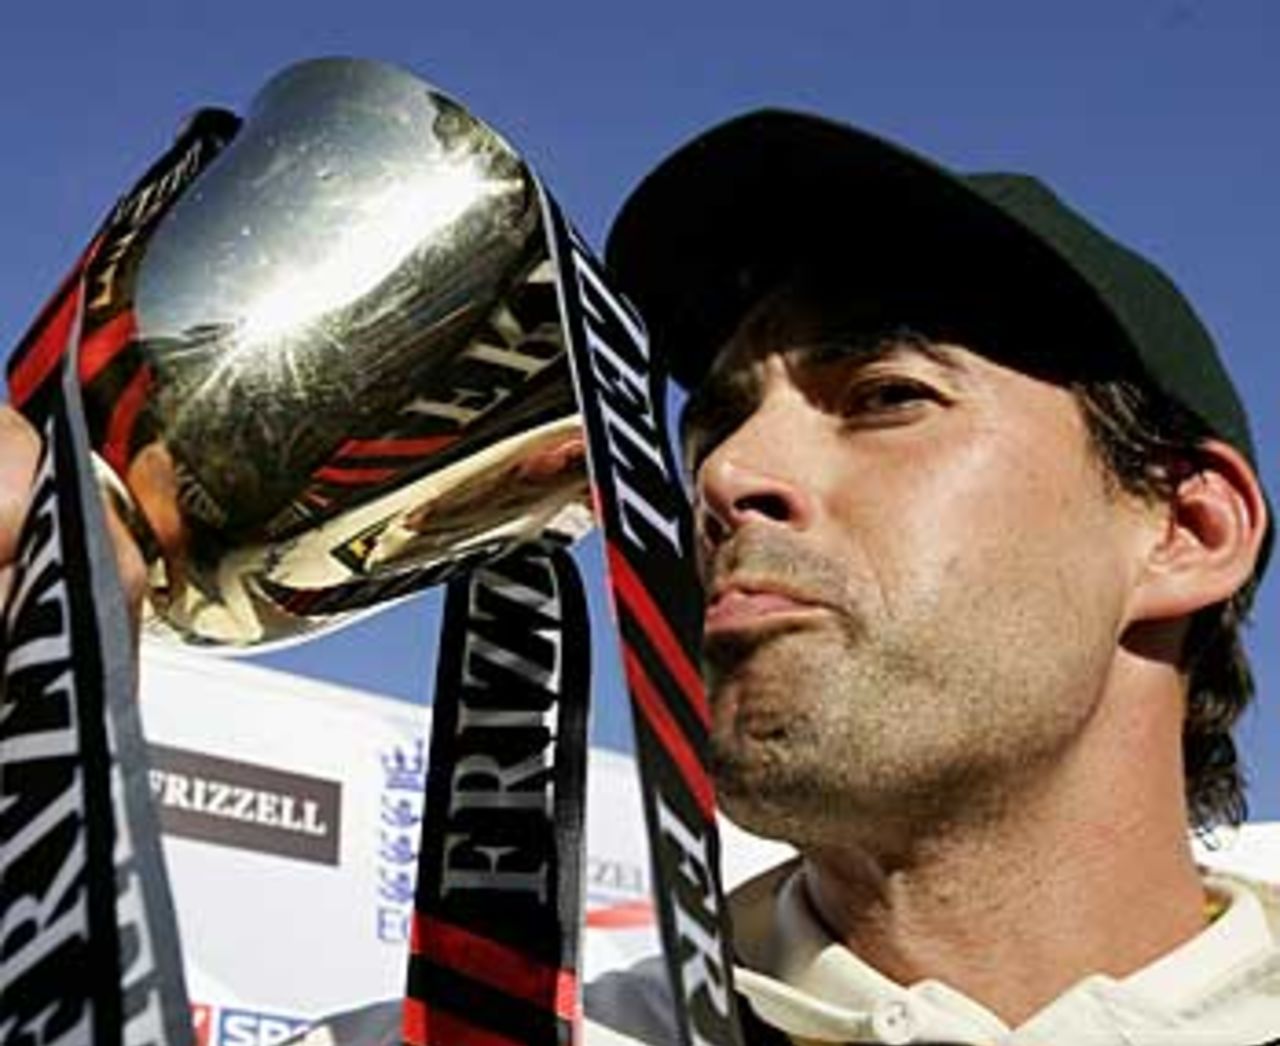 Stephen Fleming slates his thirst from the trophy, after Notts won the County Championship title, Kent v Notts, Canterbury, September 17, 2005